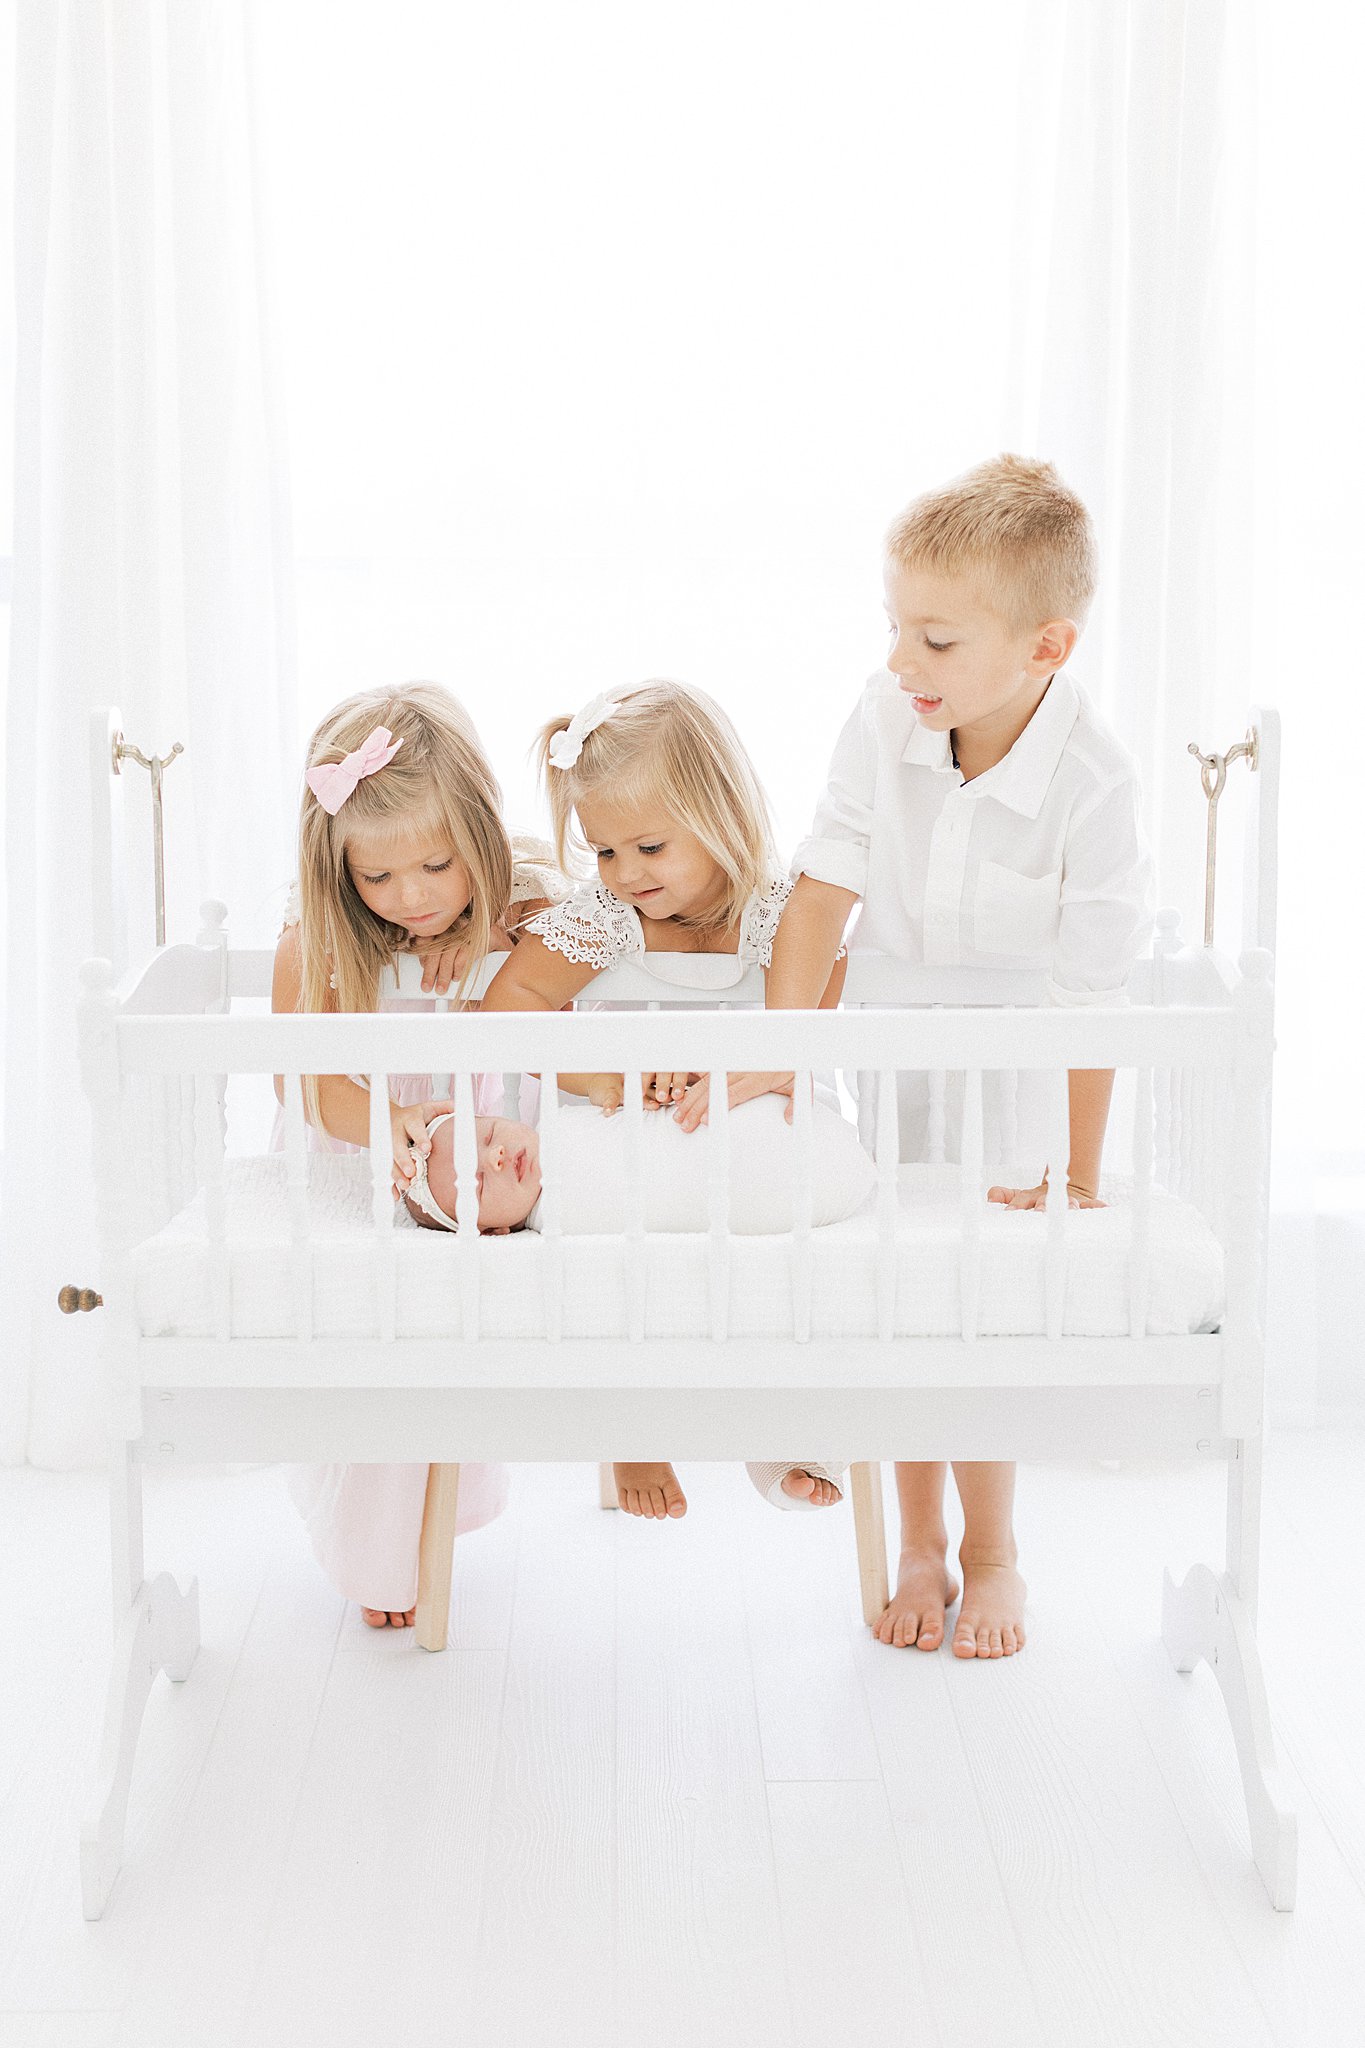 Three siblings stand over and reach into the crib of their newborn baby sister Dallas baby furniture stores